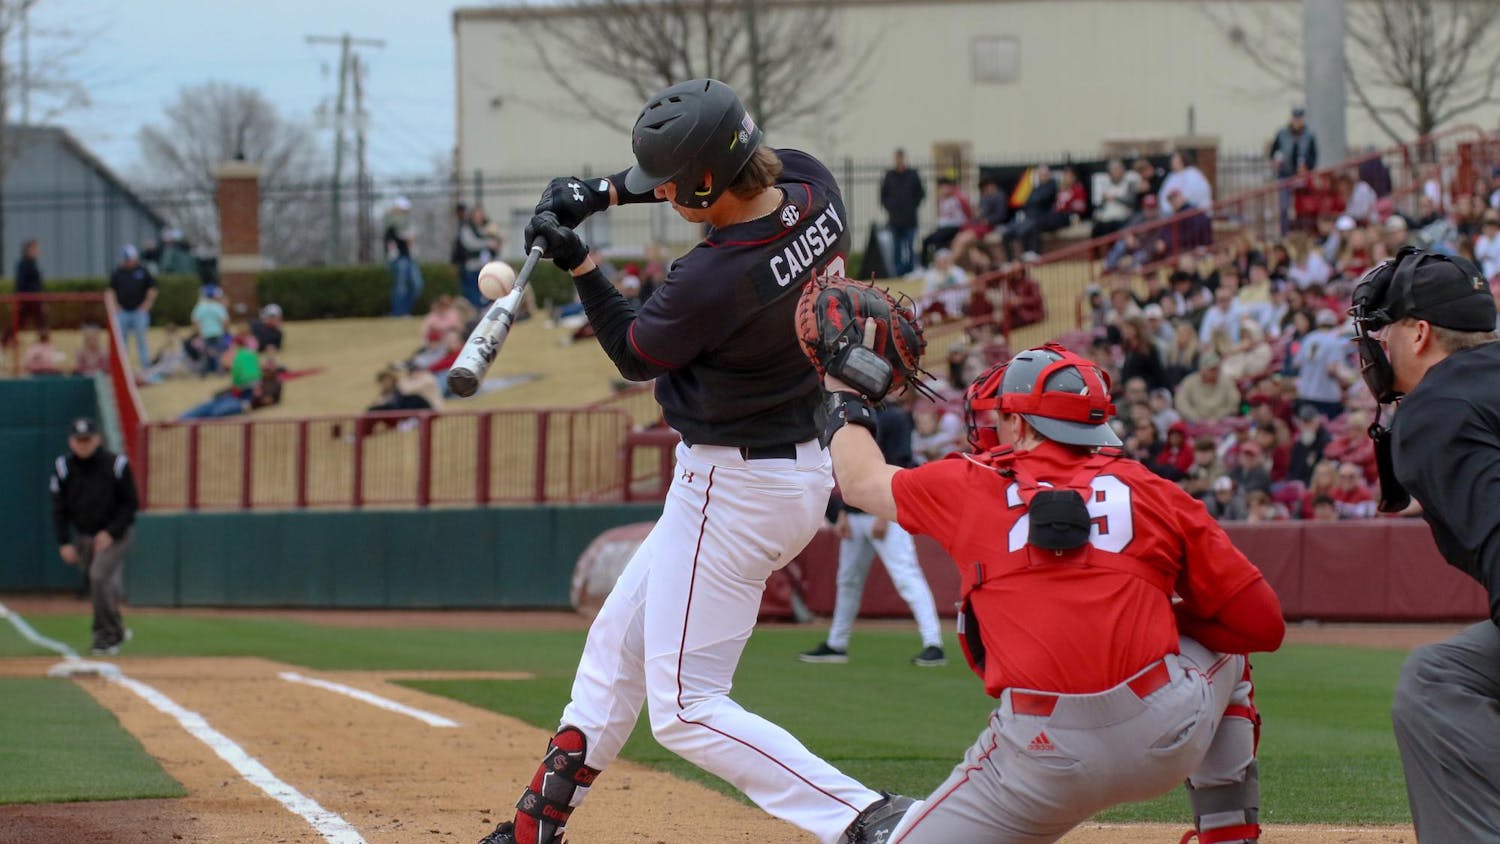 Senior infielder Tyler Causey swings at the ball during the Gamecocks' 14-0 victory over Miami-Ohio on Feb. 18, 2024. Causey had 3 hits during the three-game opening series at Founders Park.